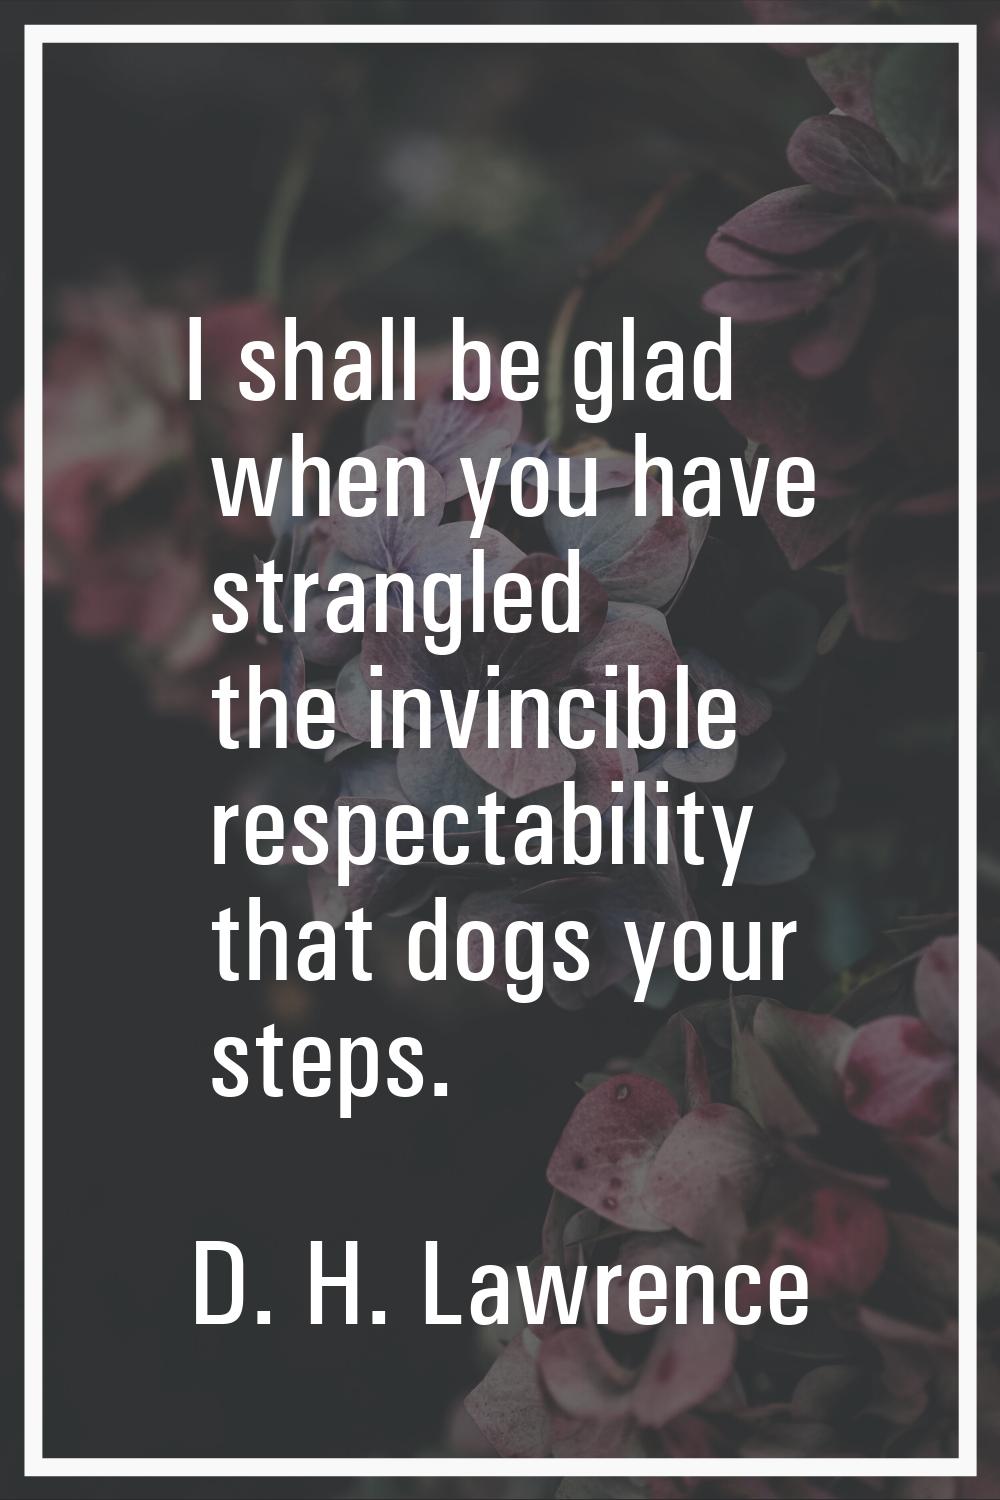 I shall be glad when you have strangled the invincible respectability that dogs your steps.